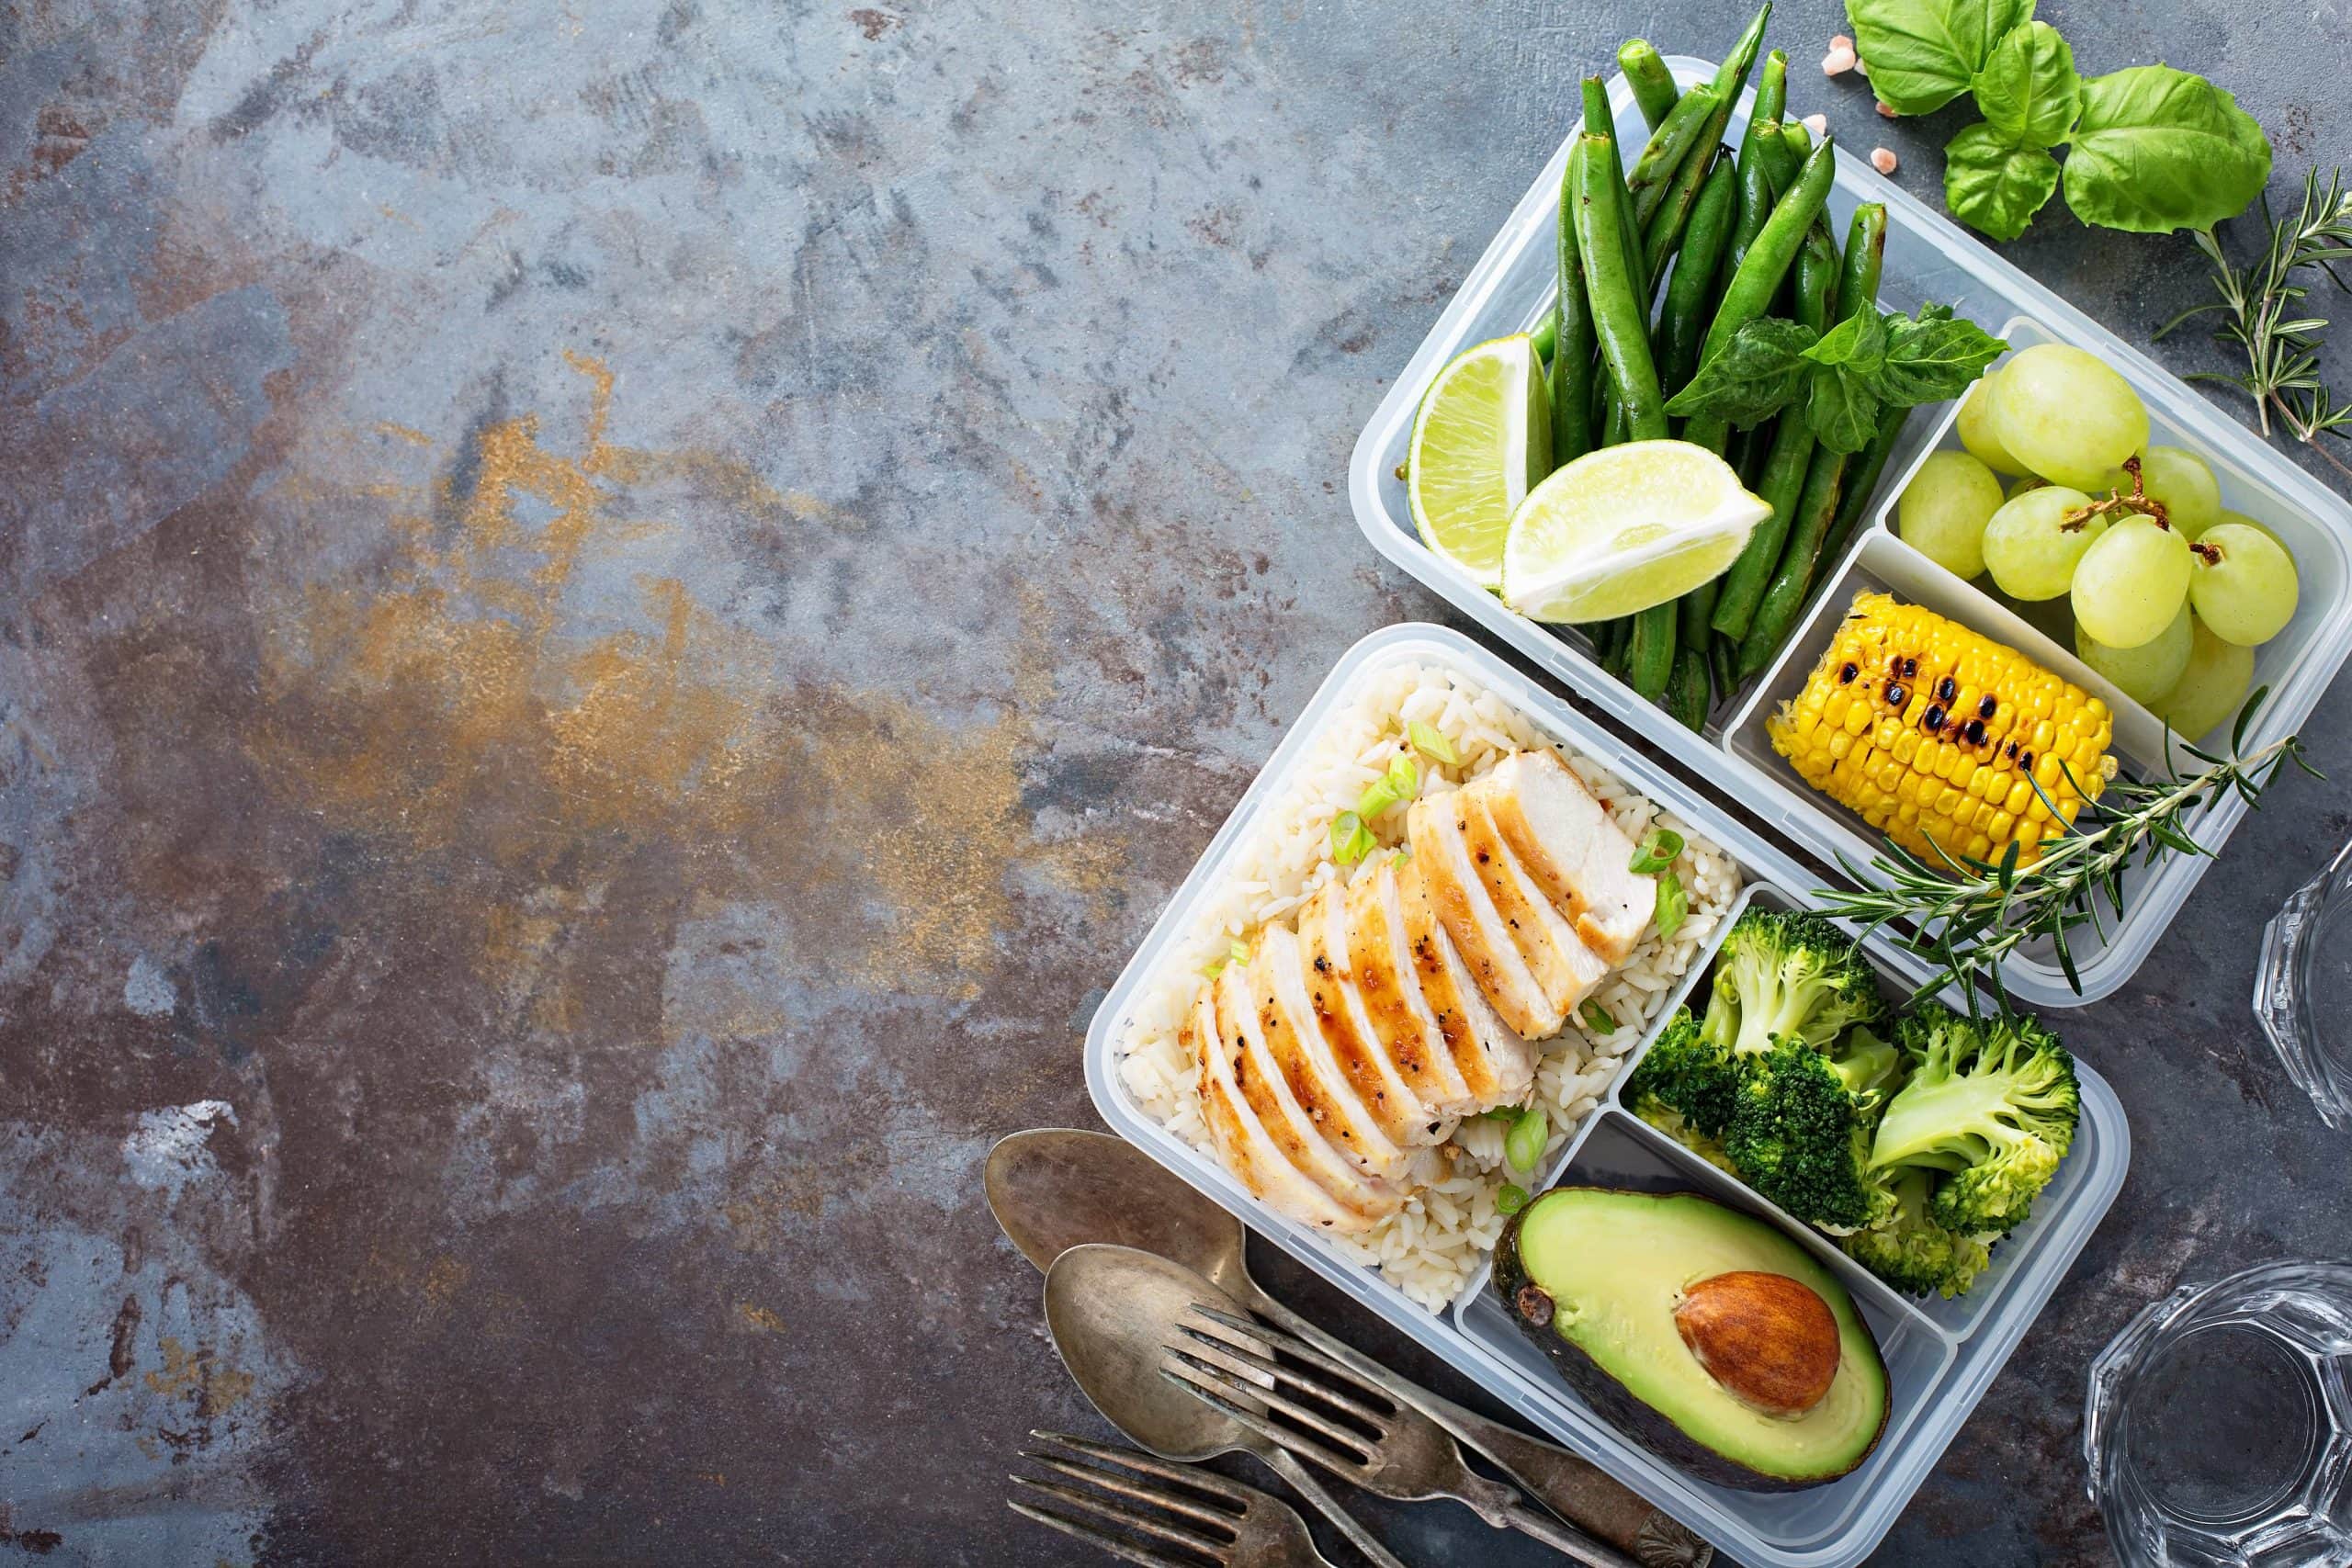 Best Containers for Meal Prep (Have You Tried Any of These?)